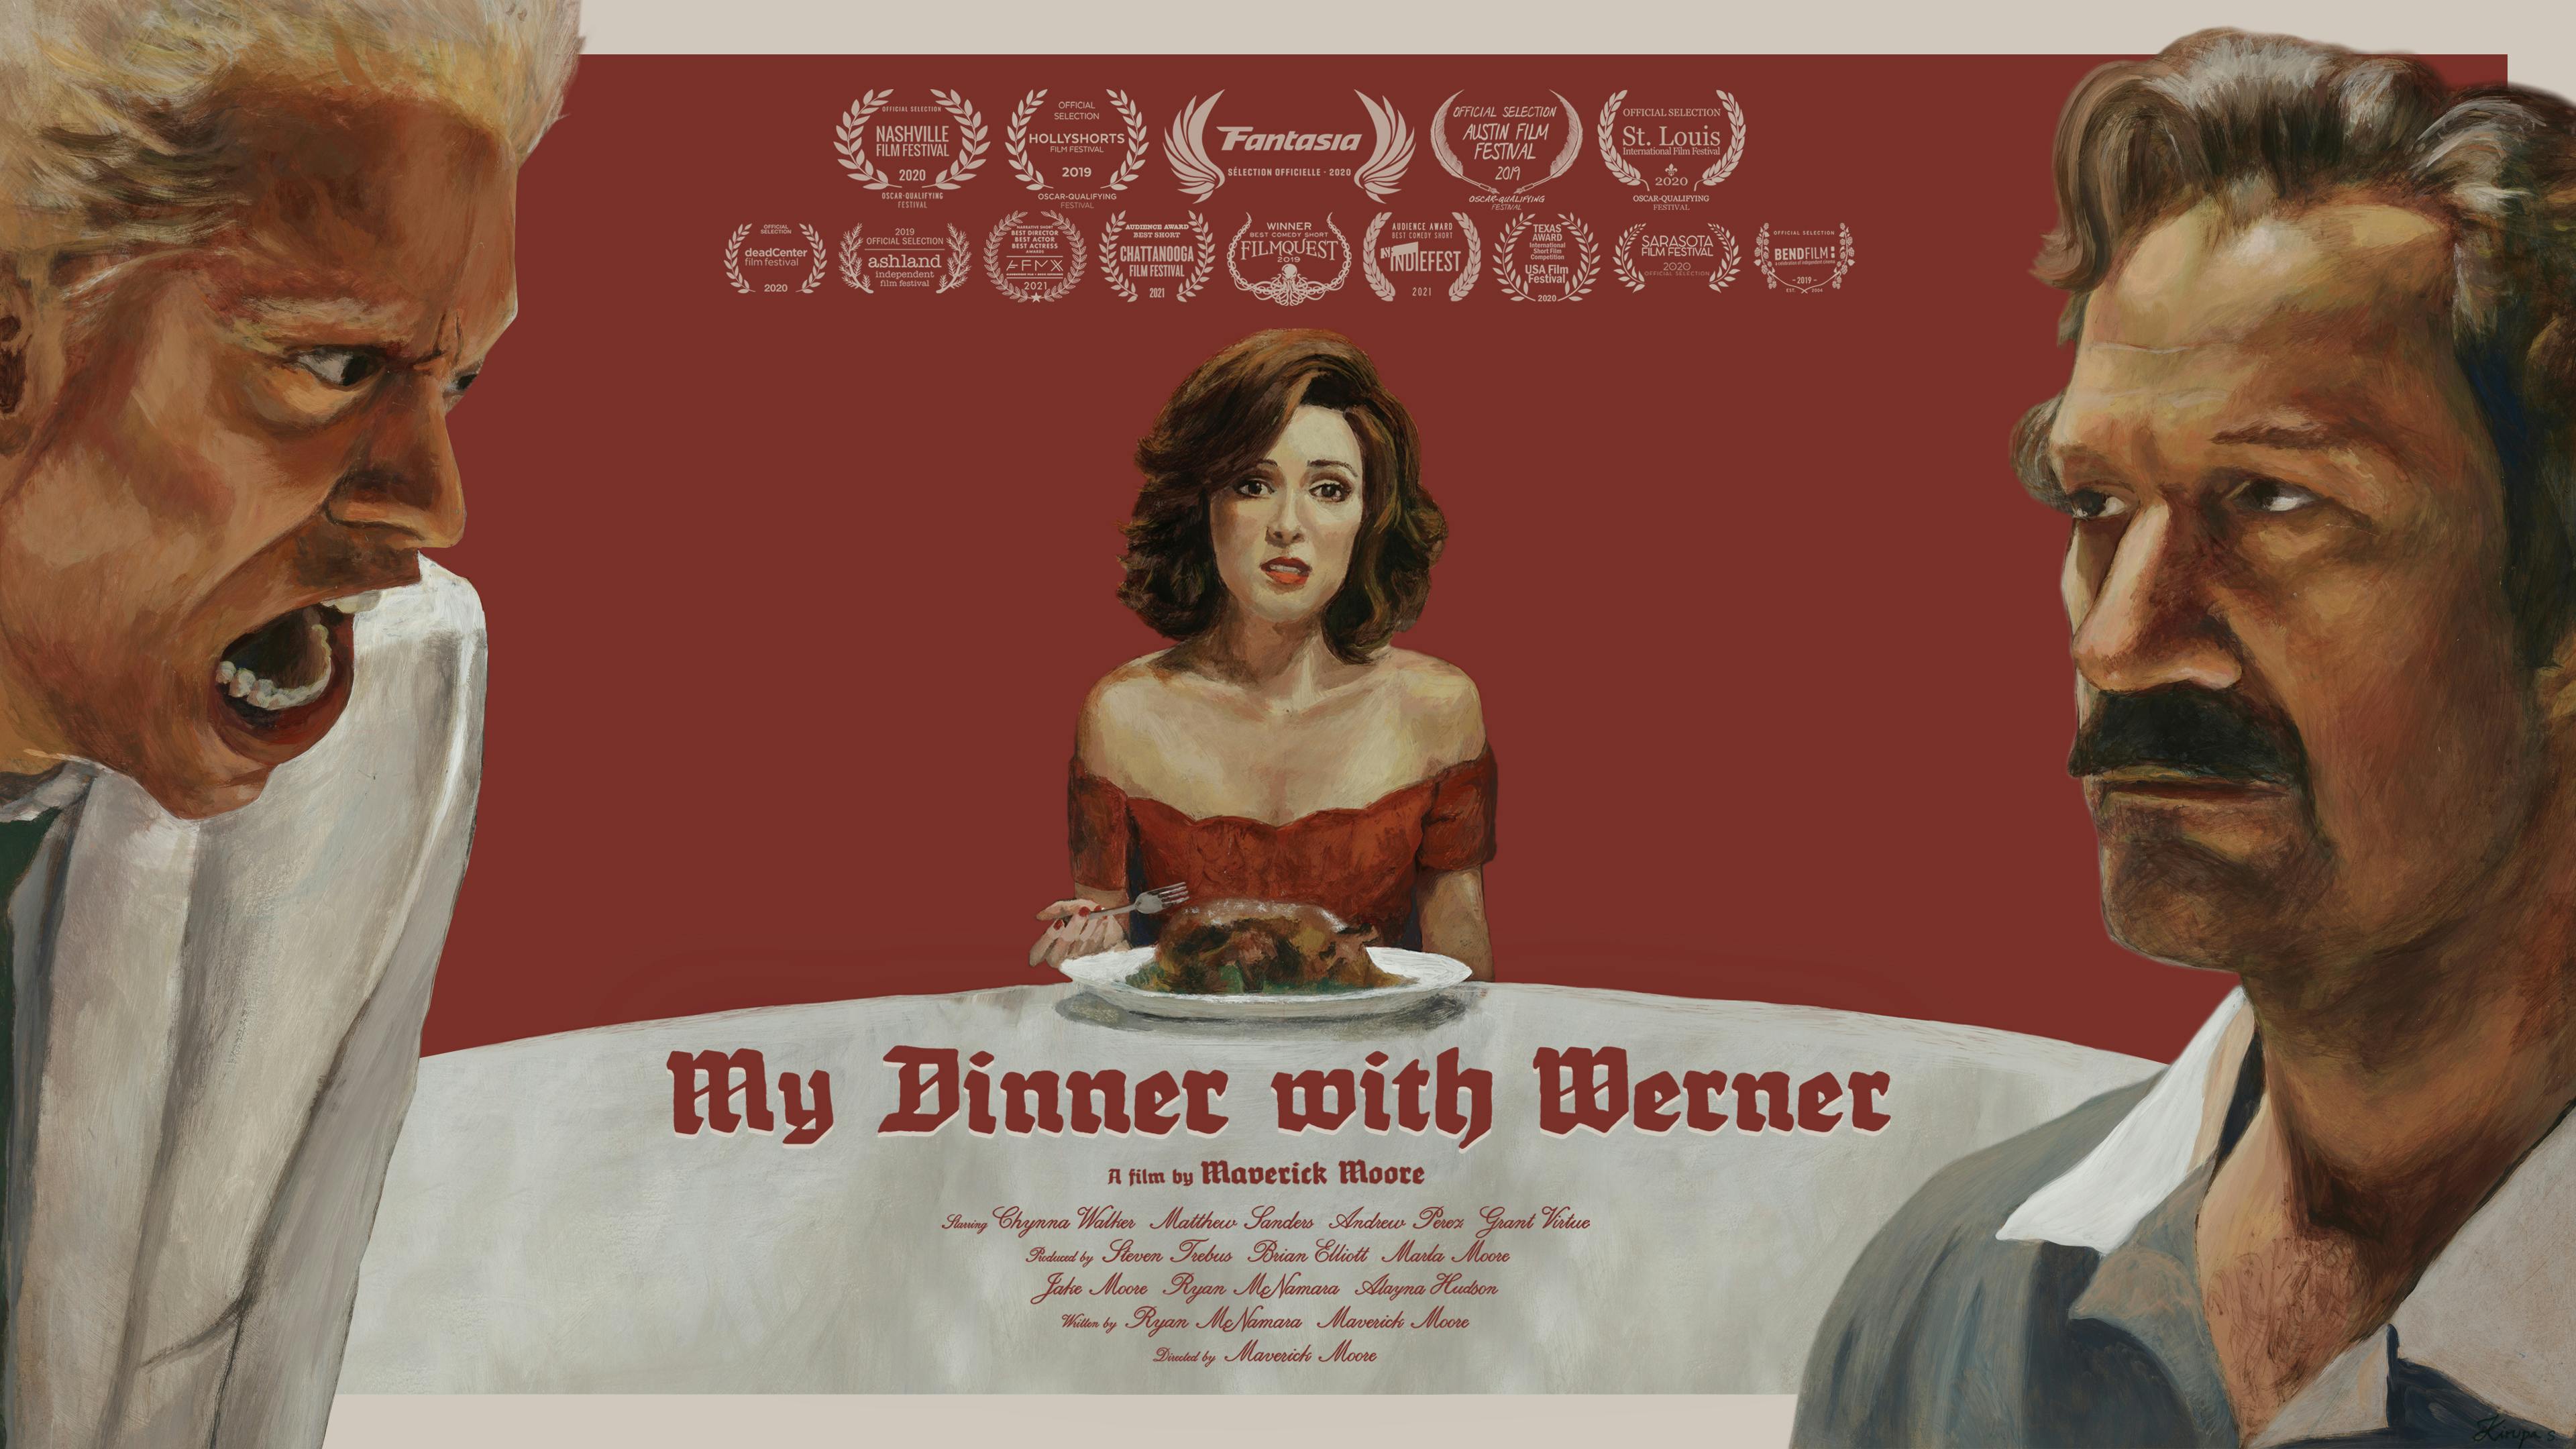 A movie poster for "My Dinner with Werner" with a woman in a red dress in the center and a man in a white suit yelling at a man on the right